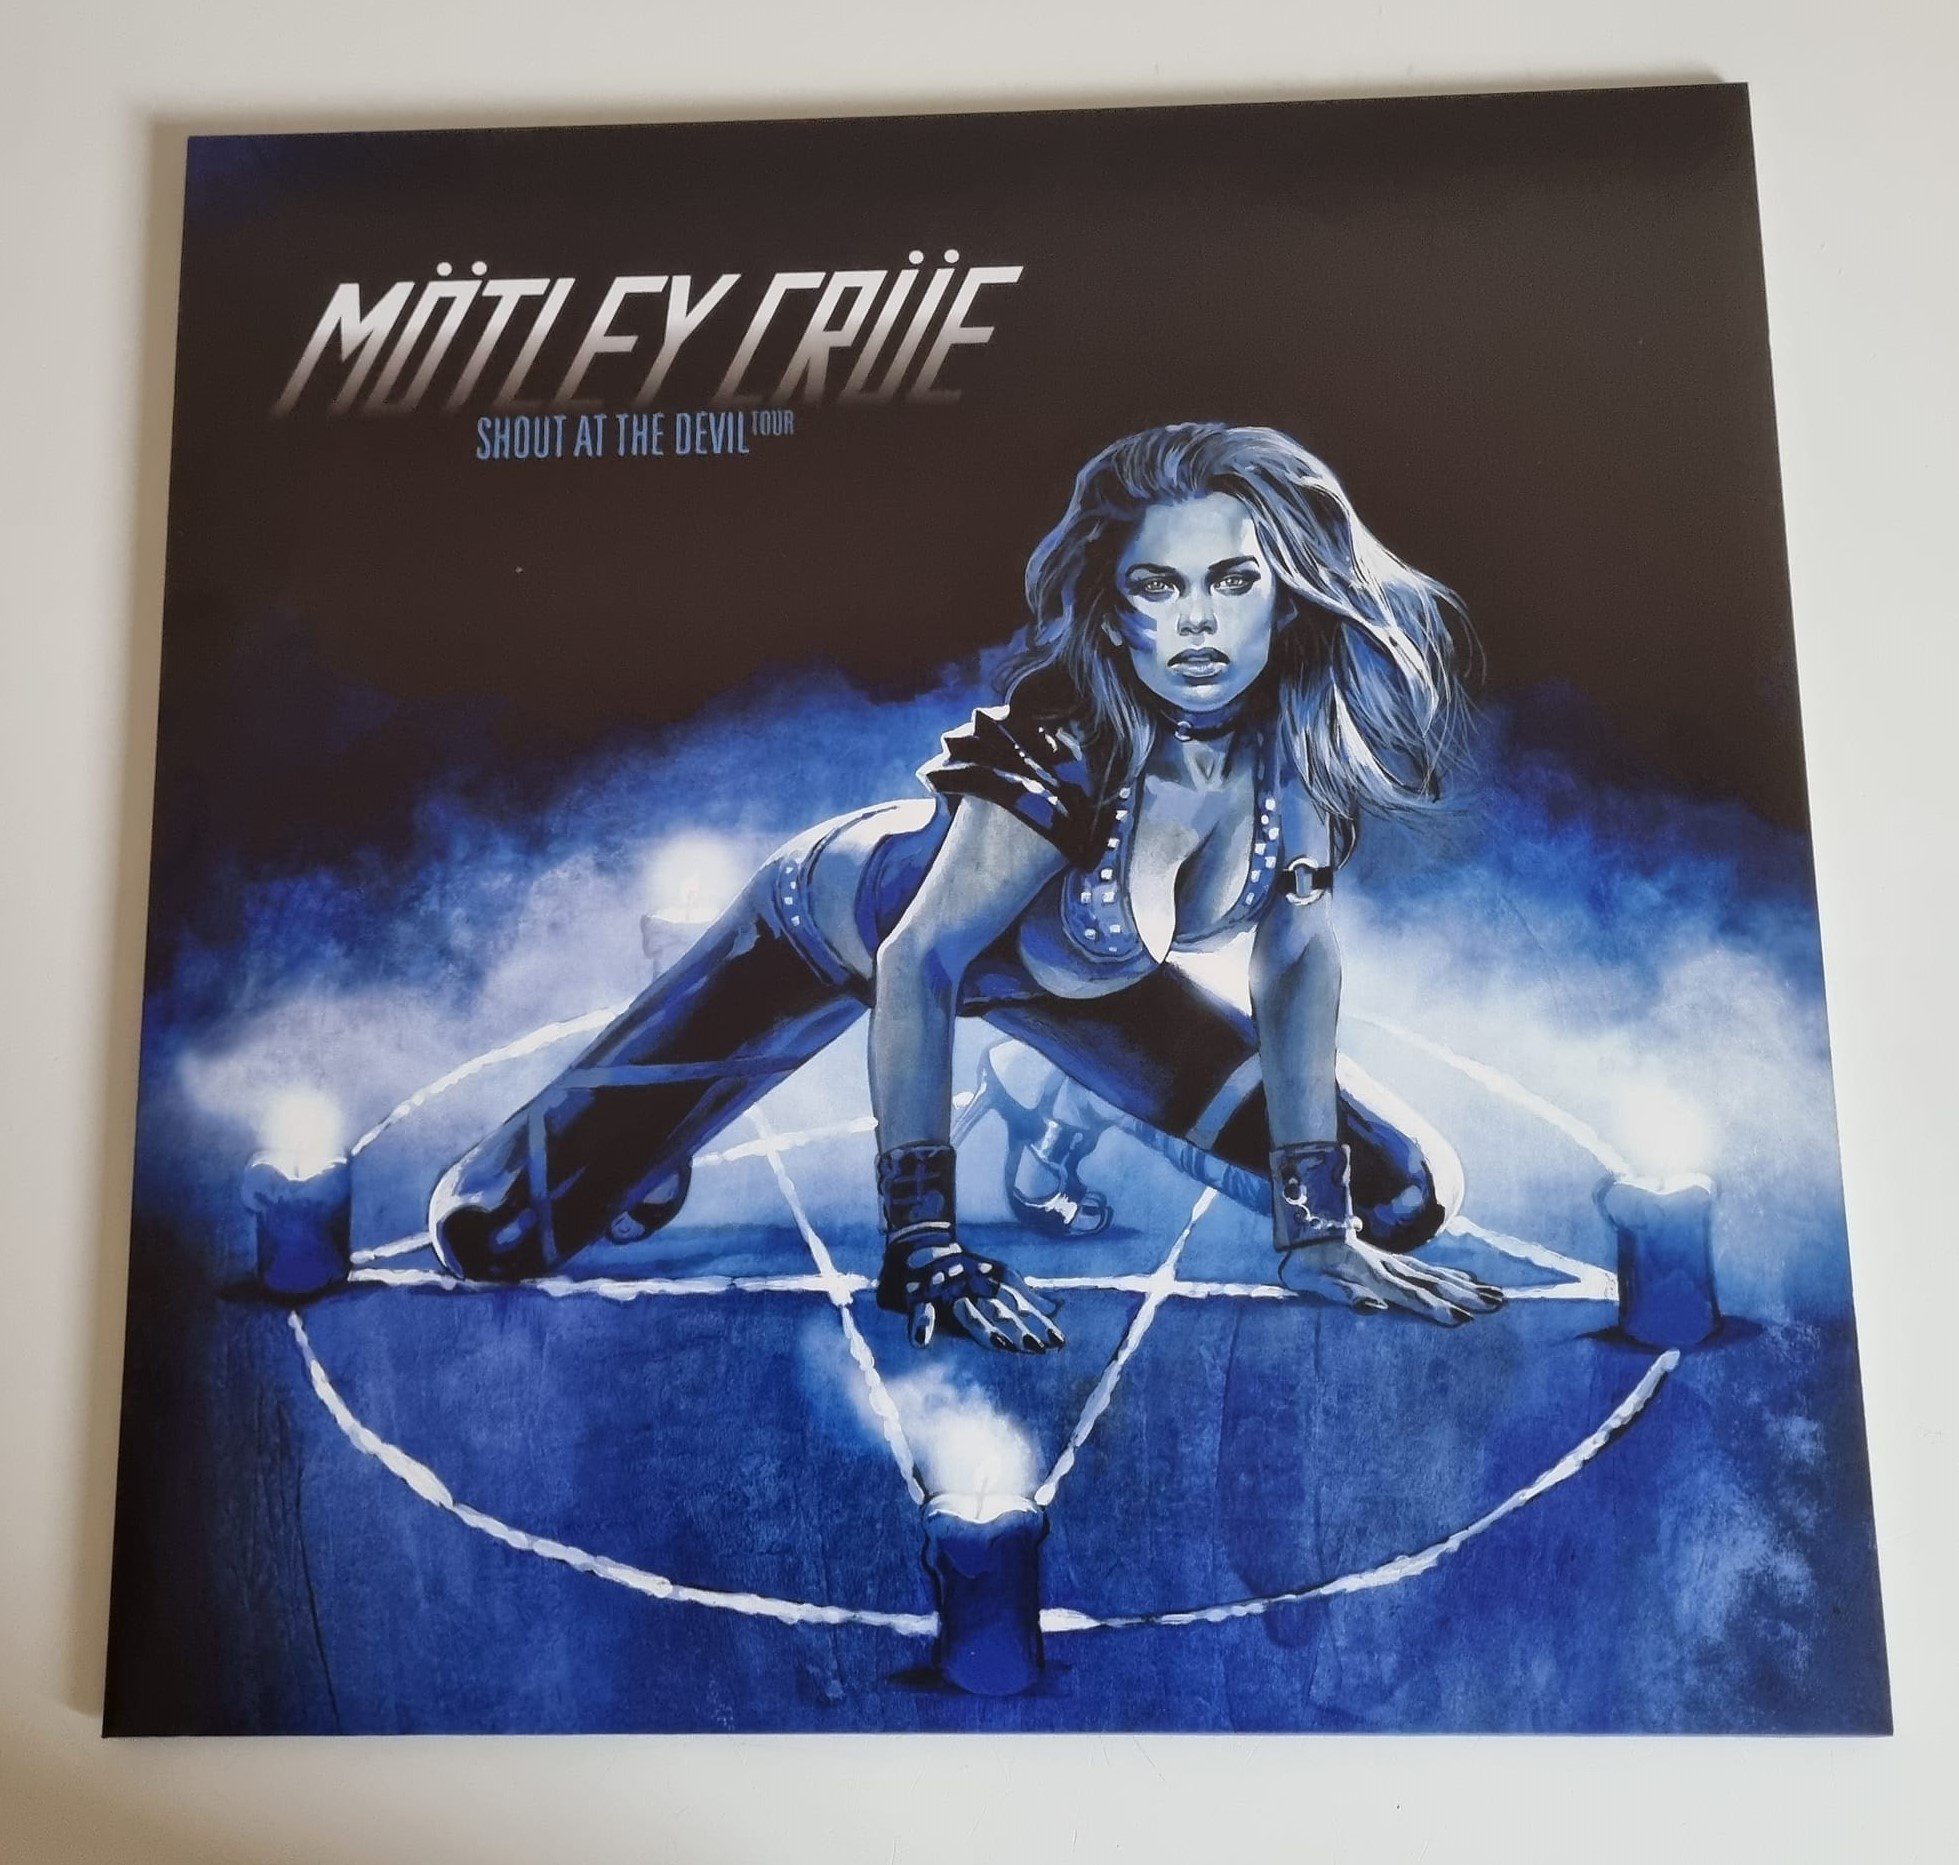 Buy this rare Motley Crue record by clicking here